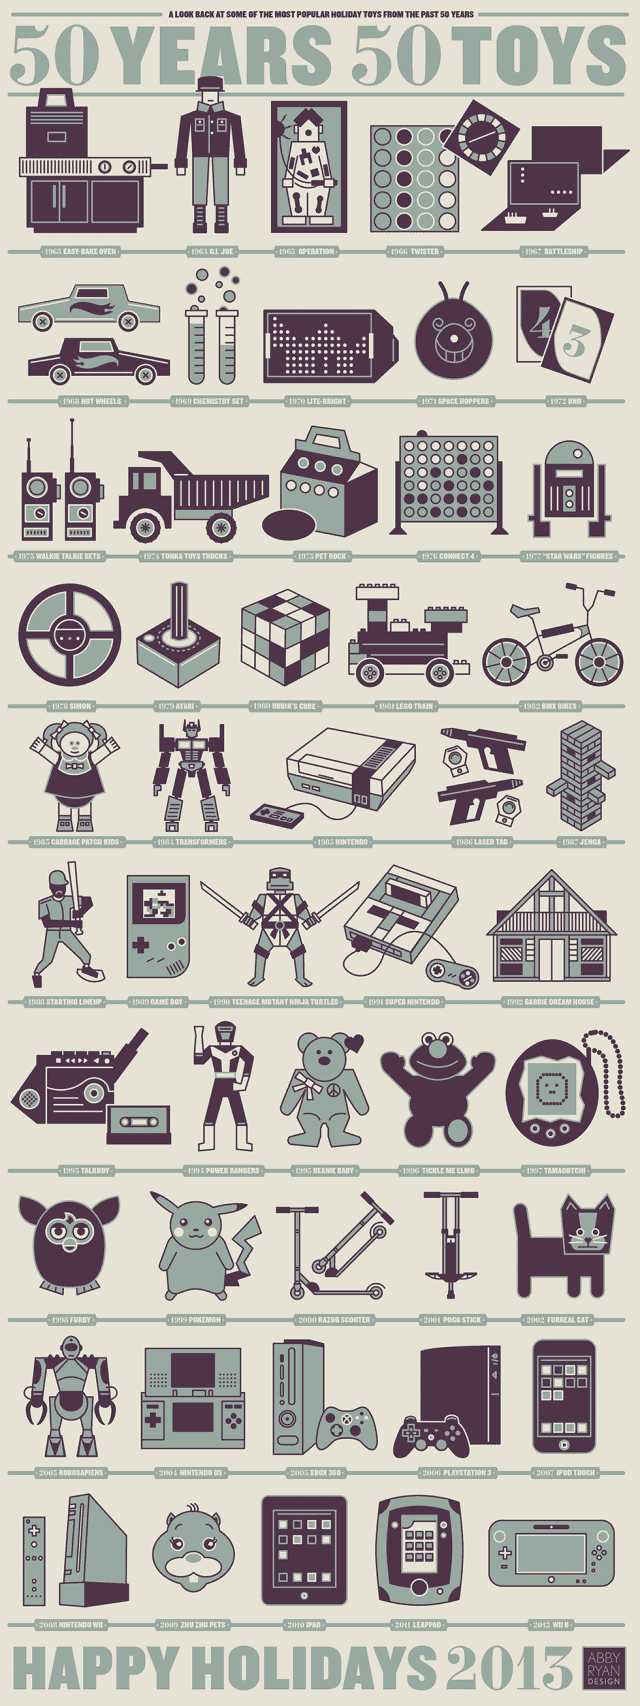 50 Years 50 Toys Infographic